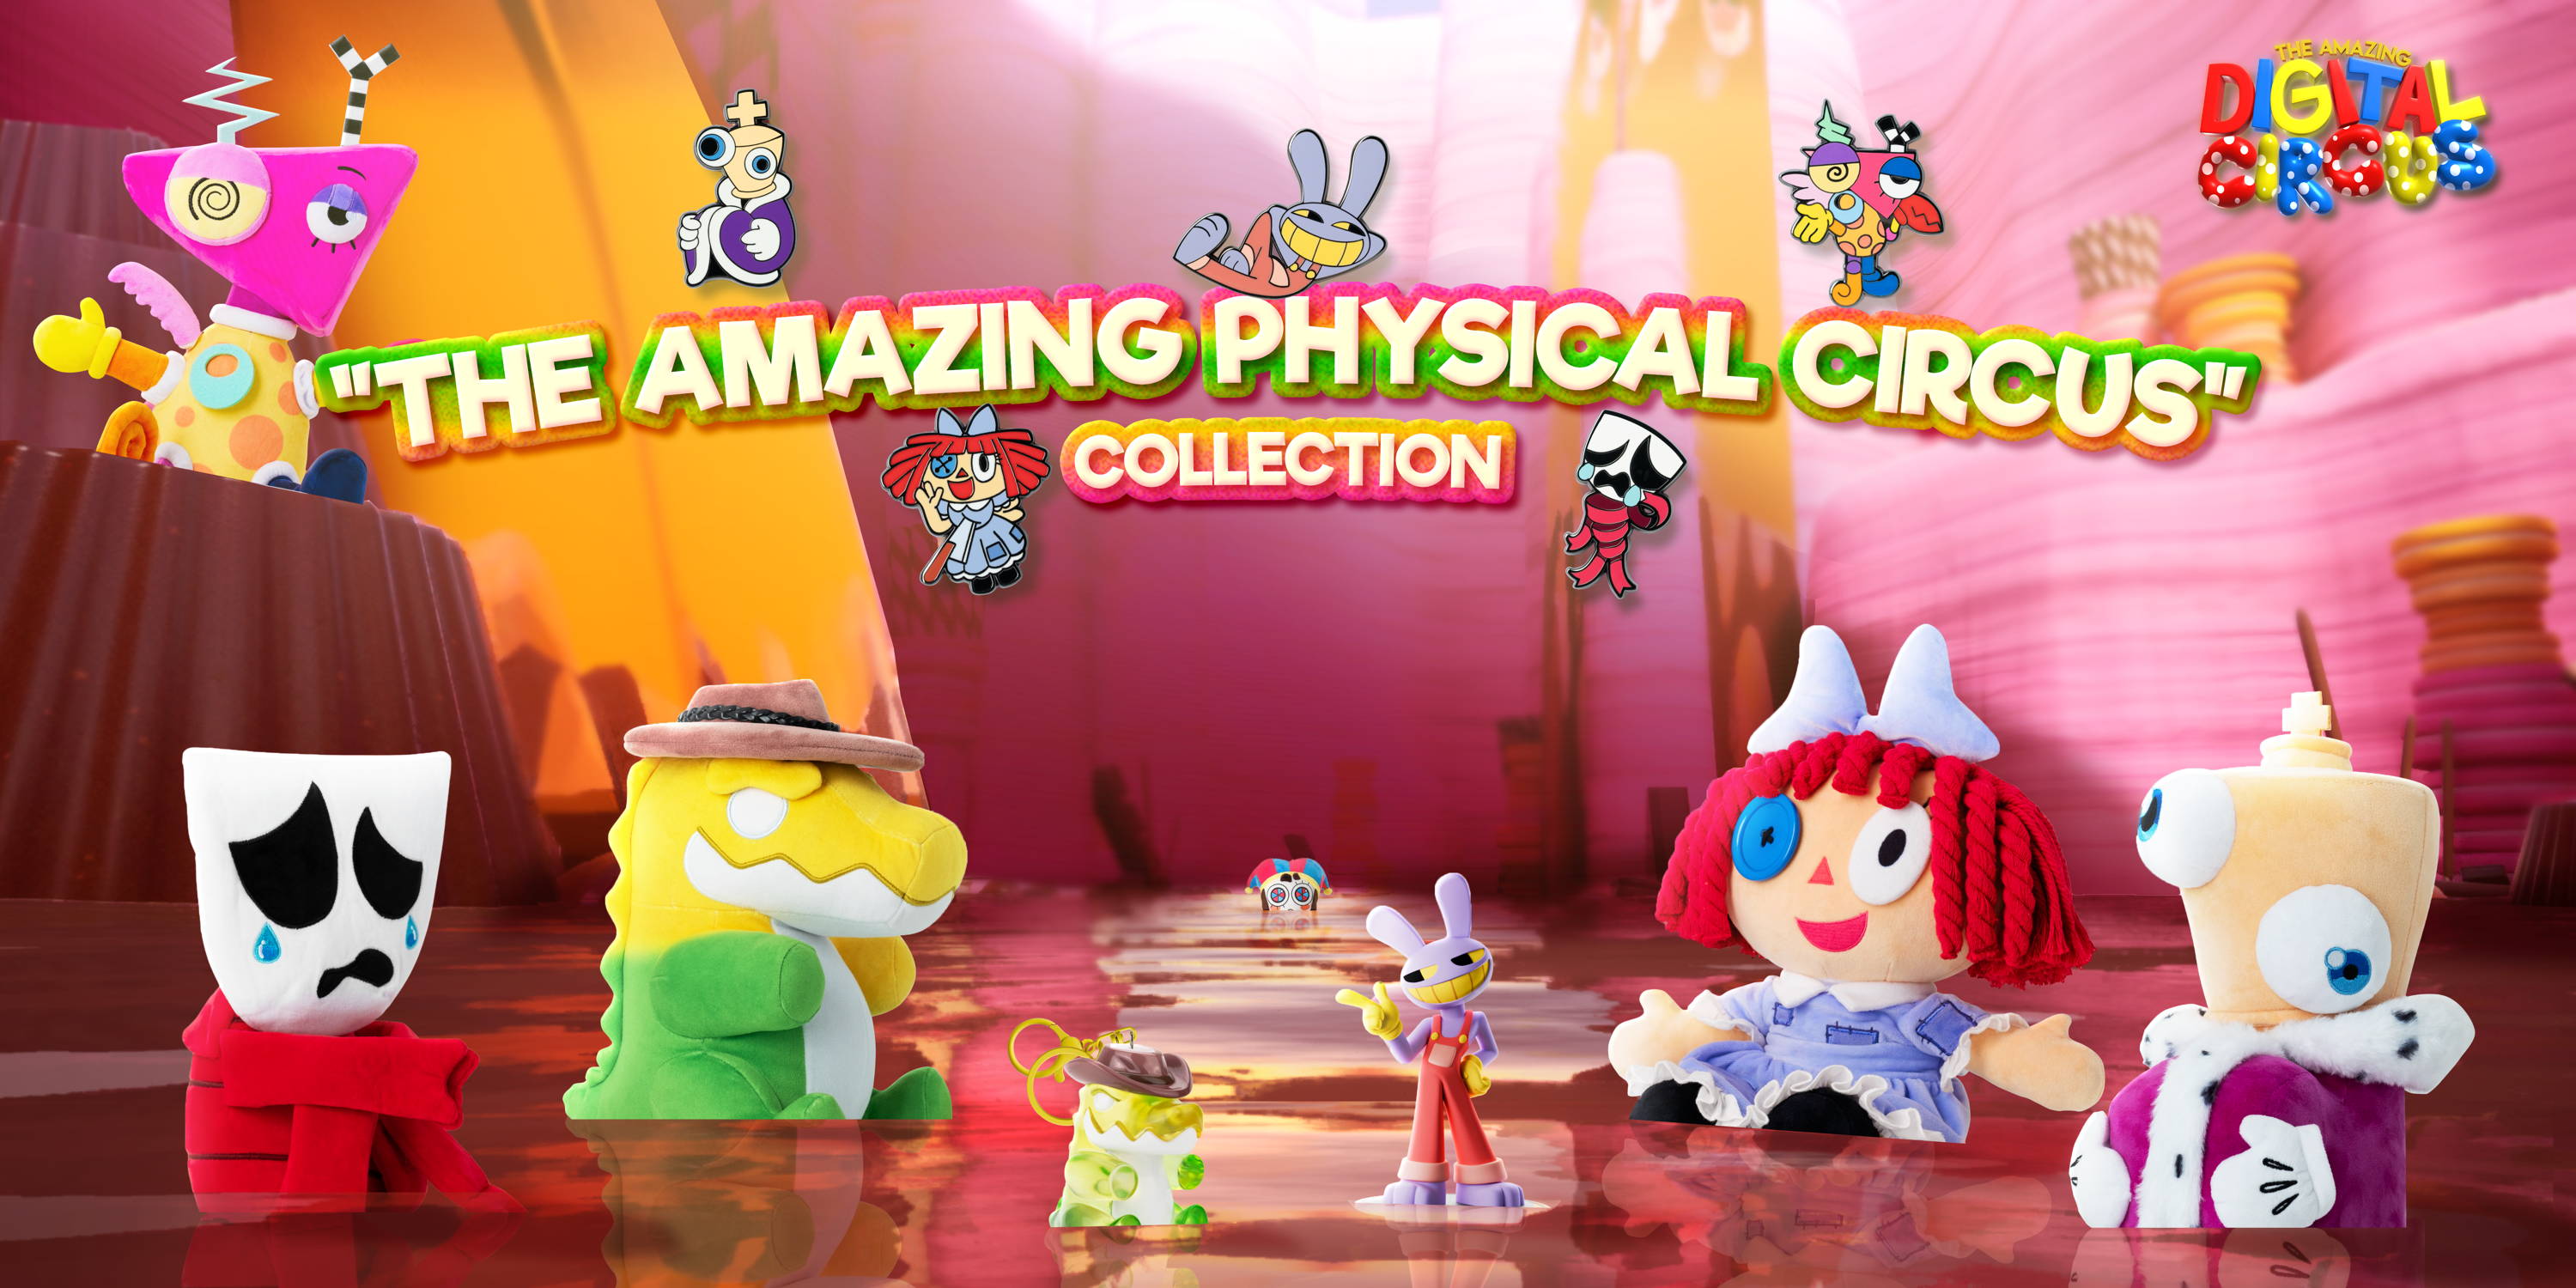 Promotional image for "The Amazing Physical Circus" merch collection